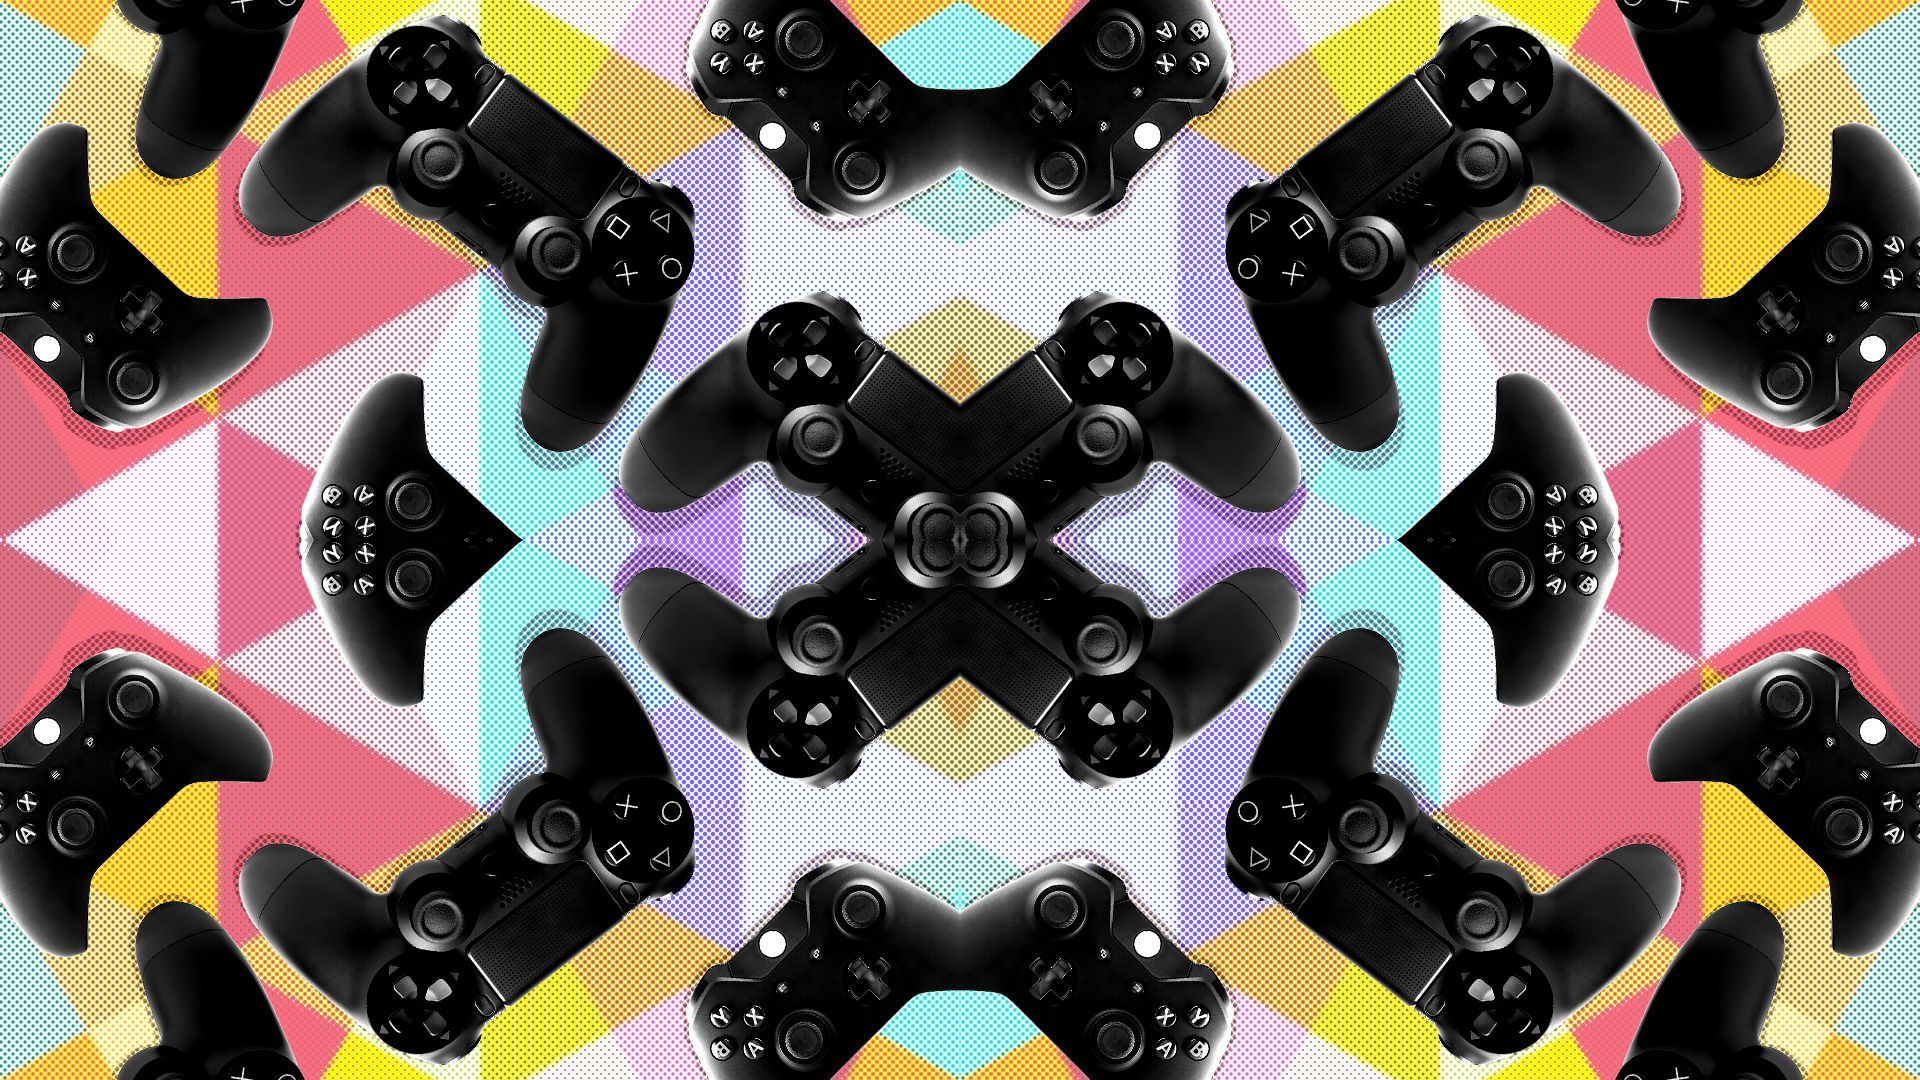 Illustration of a kaleidoscope pattern made from video game controllers.  